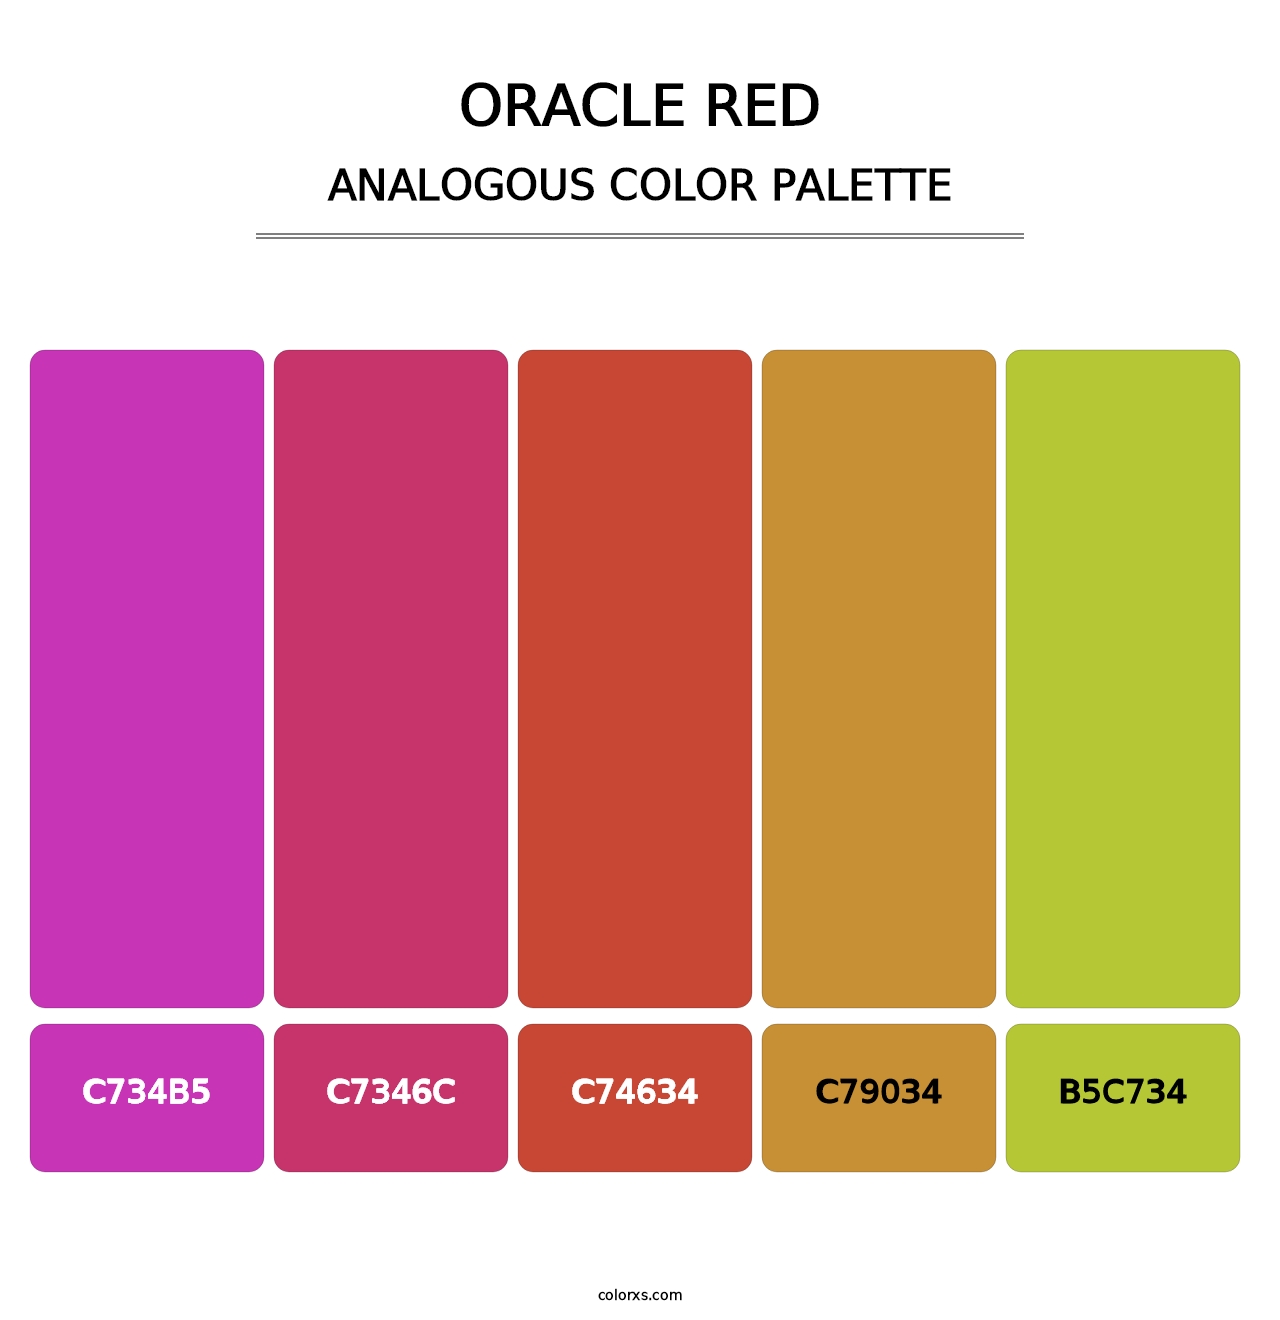 Oracle Red - Analogous Color Palette